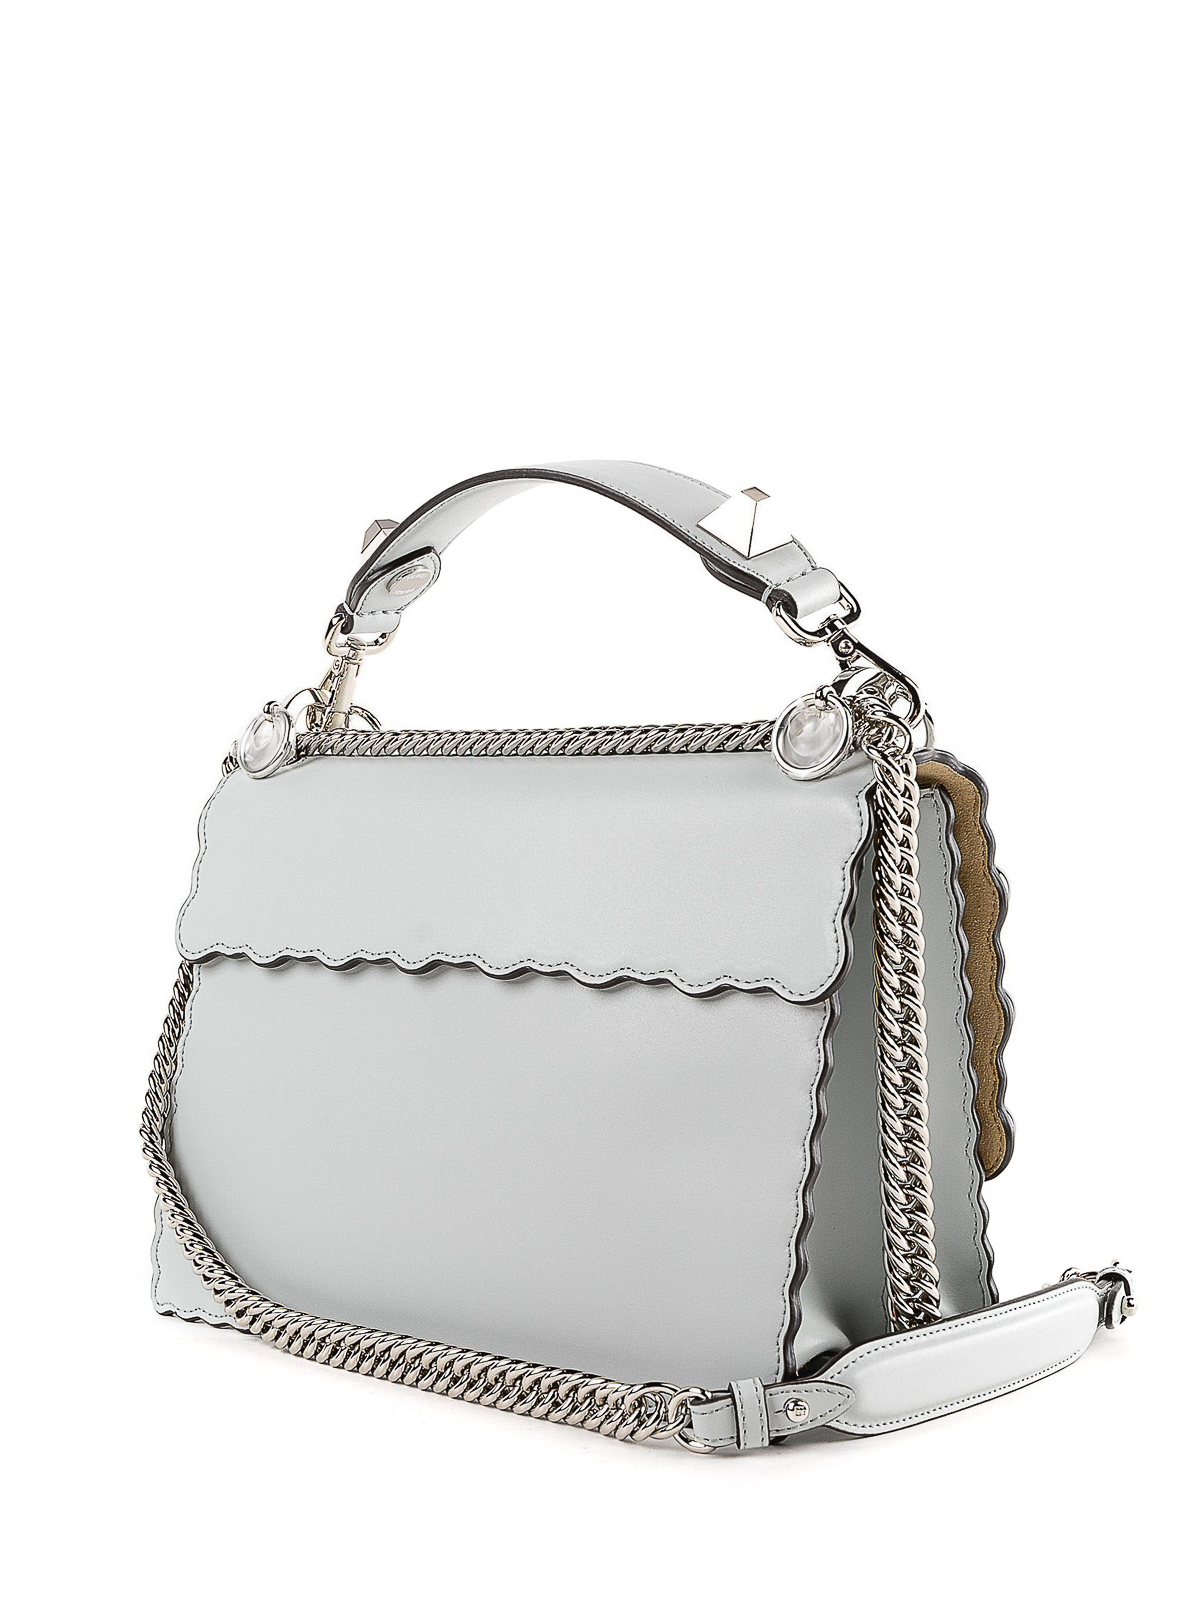 grey bag with studded scalloped flap 